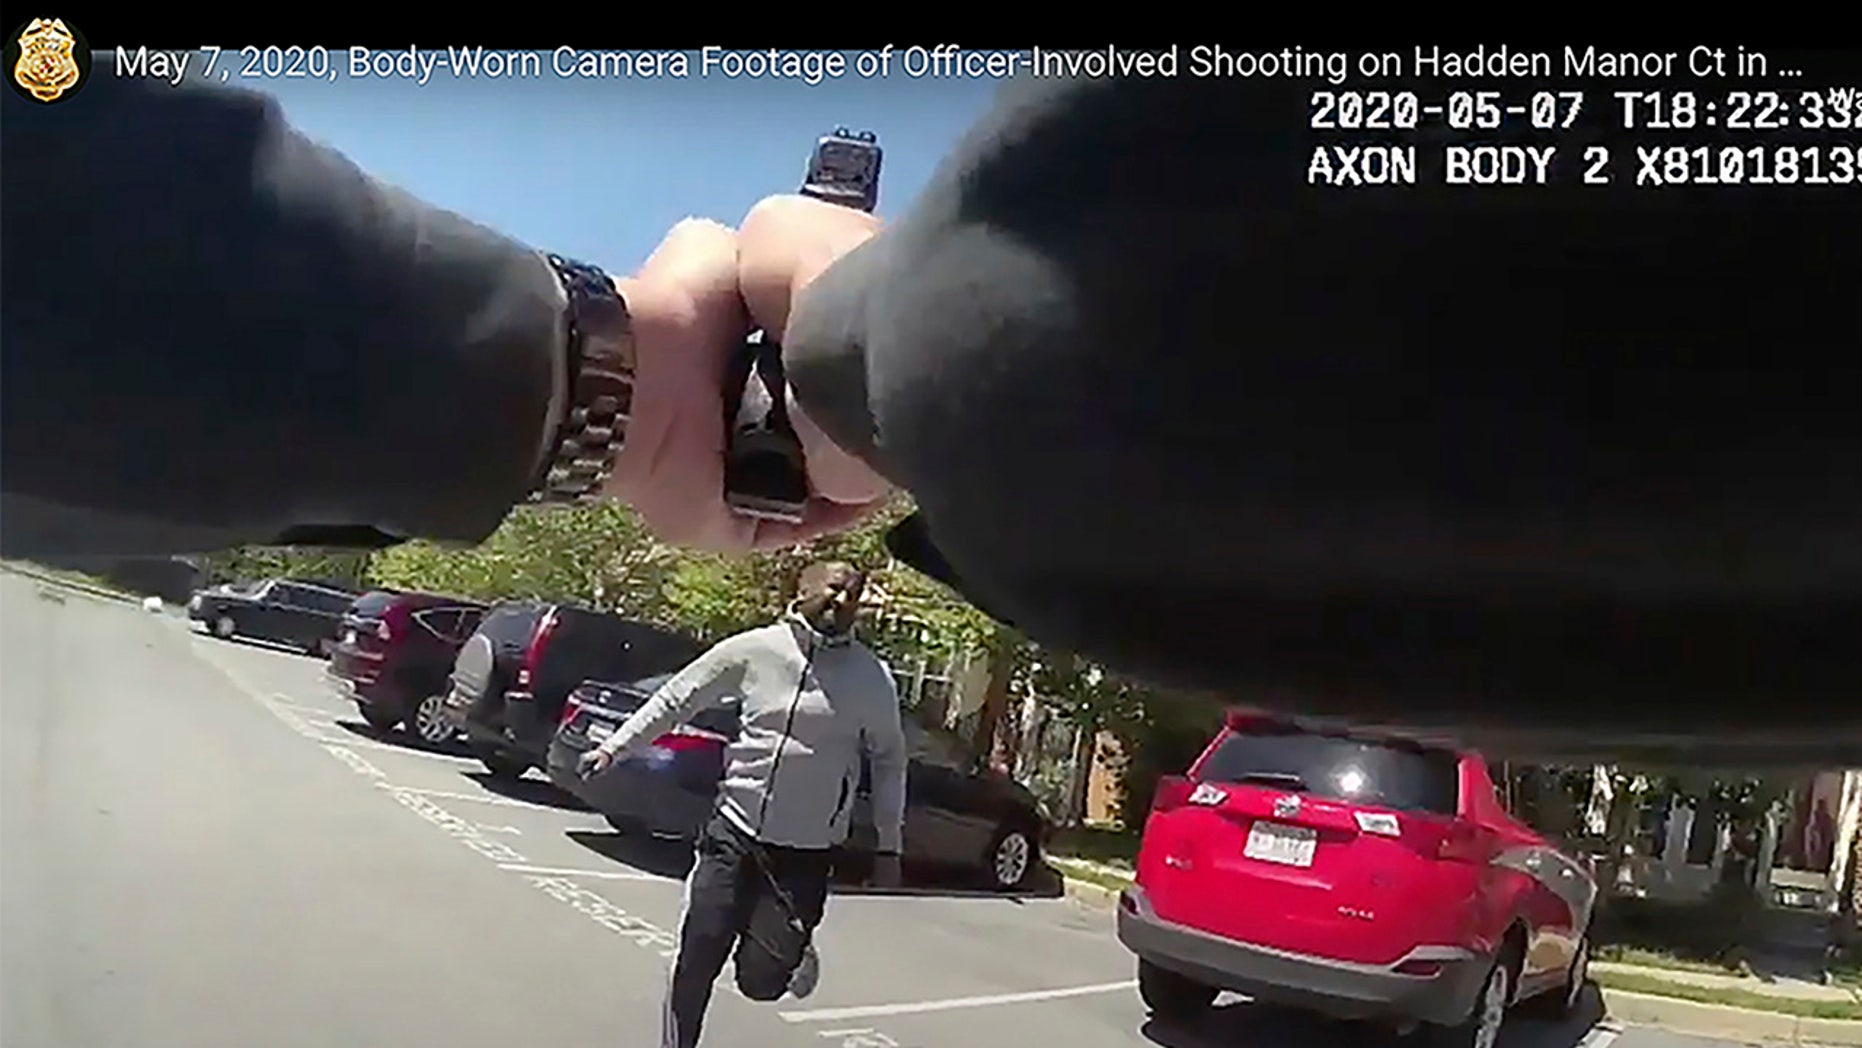 In this frame grab from body camera video provided by the Montgomery County Department of Police, taken Thursday, May 7, 2020, Montgomery County Police Sgt. David Cohen aims and shoots Finan H. Berhe, as Berhe, holding a knife, charges at Cohen, after the officer had ordered Berhe to drop the knife and get down on the ground, in the White Oak area of Montgomery County, Md. Berhe died at a hospital, police said. No officers were injured. (Montgomery County Department of Police via AP)